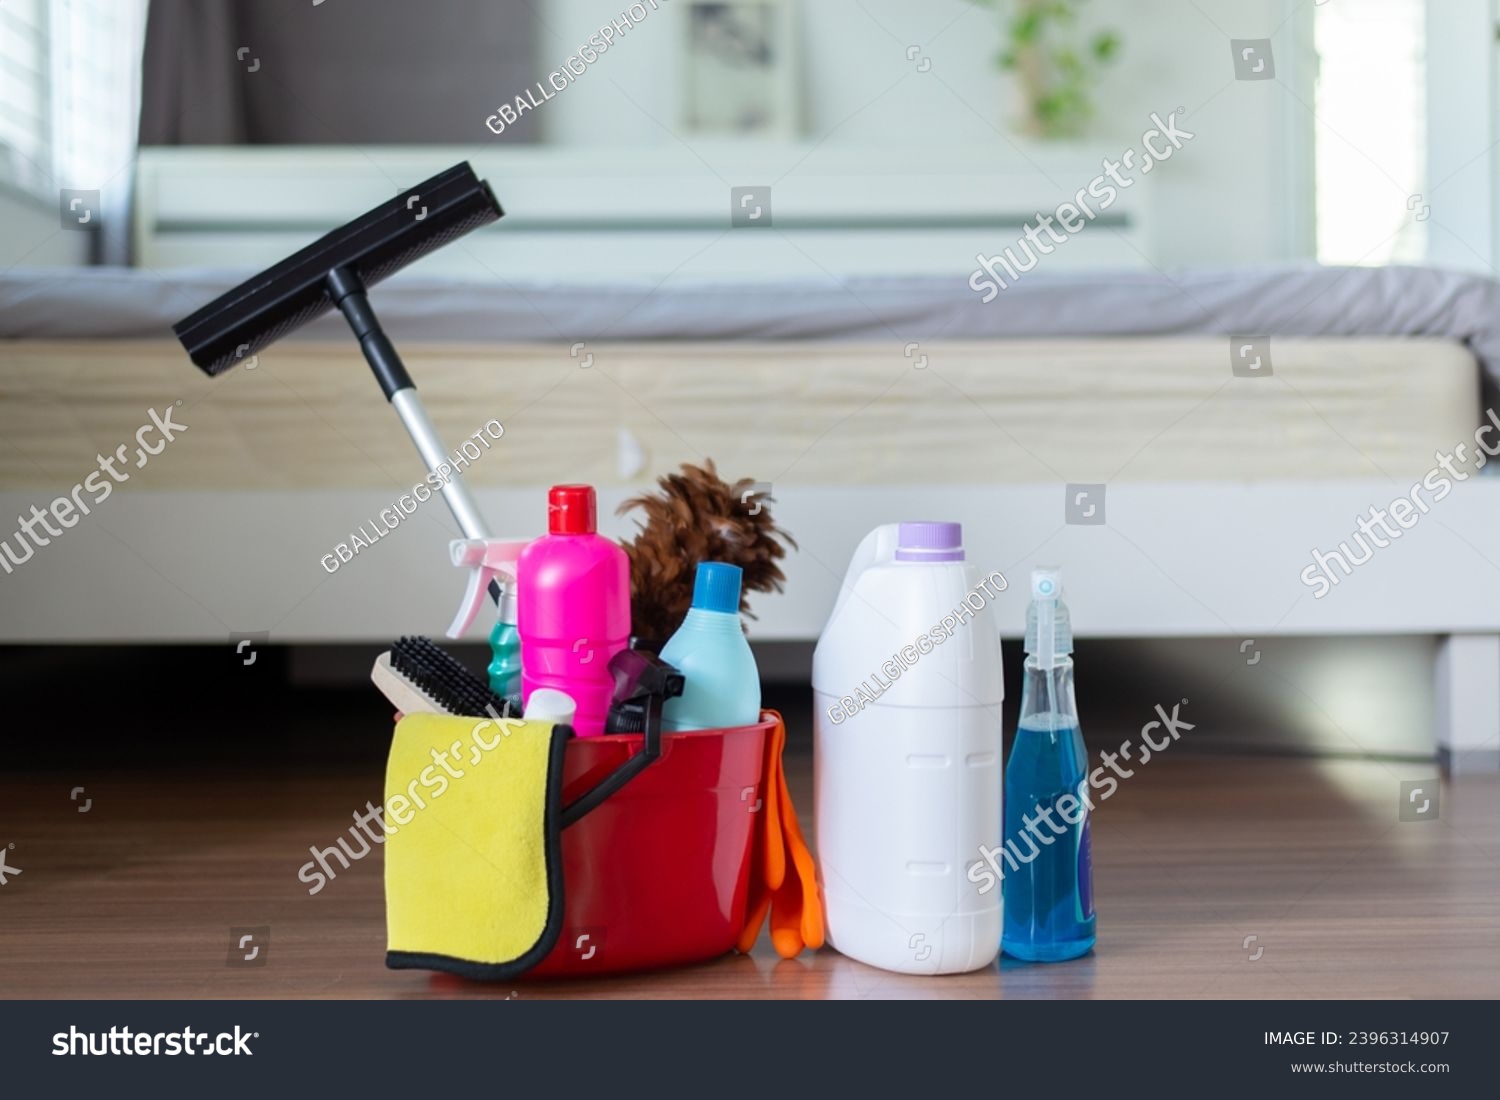 A cleaning products on wooden floor in bedroom,House cleaning concept #2396314907